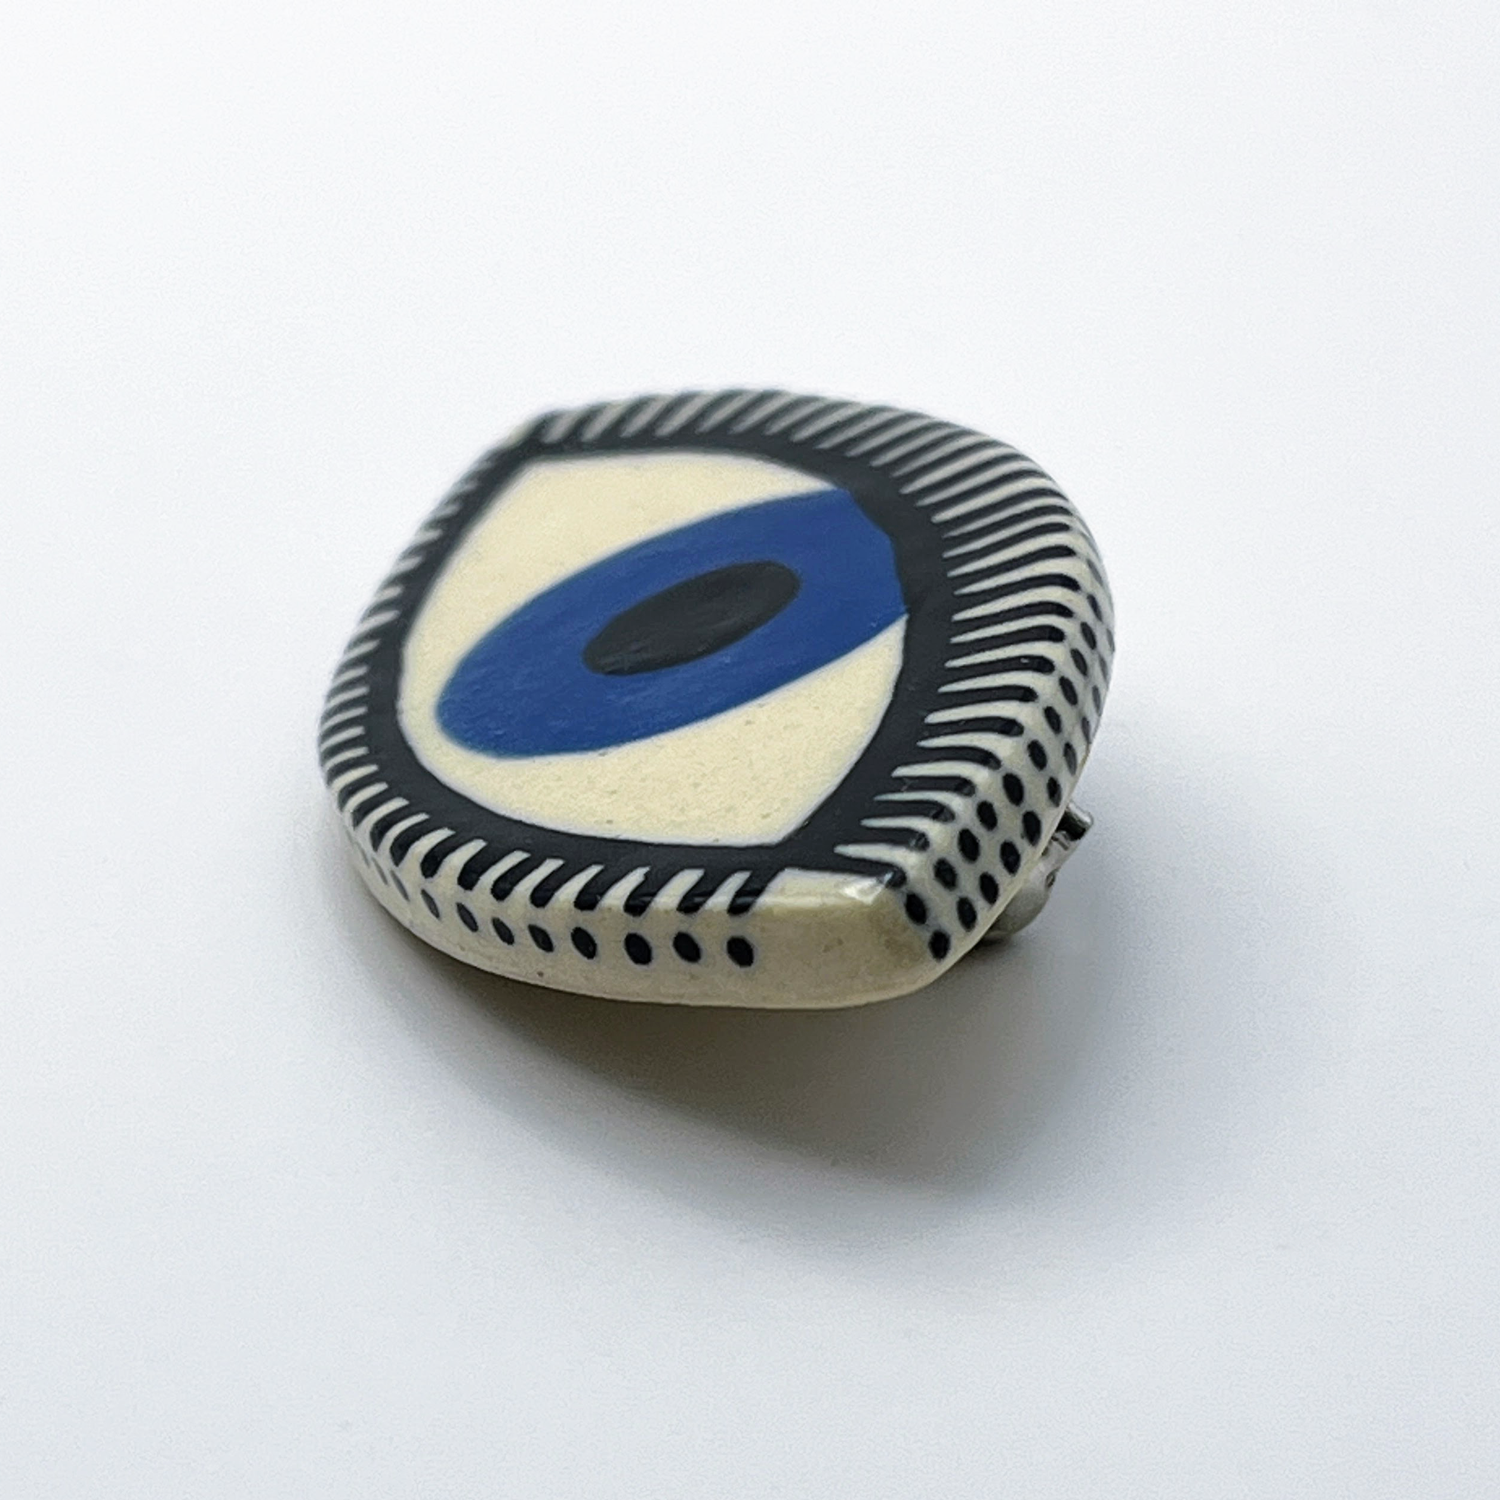 Here and Here: Blue Eye Brooch with Fine Line Lashes Product Image 2 of 2